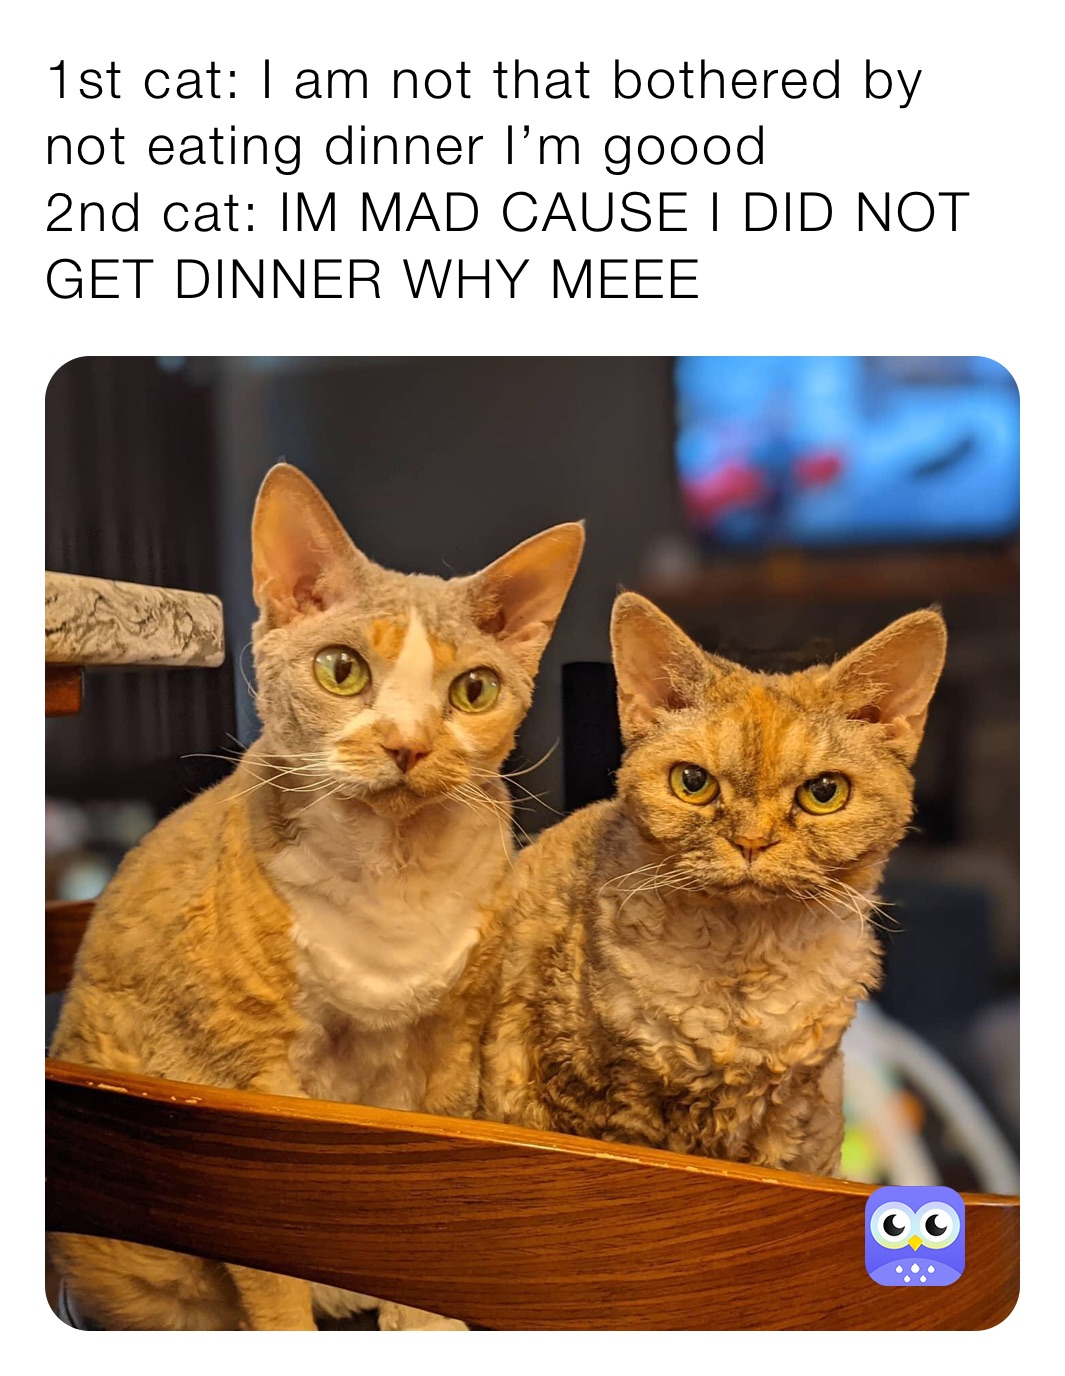 1st cat: I am not that bothered by not eating dinner I’m goood
2nd cat: IM MAD CAUSE I DID NOT GET DINNER WHY MEEE